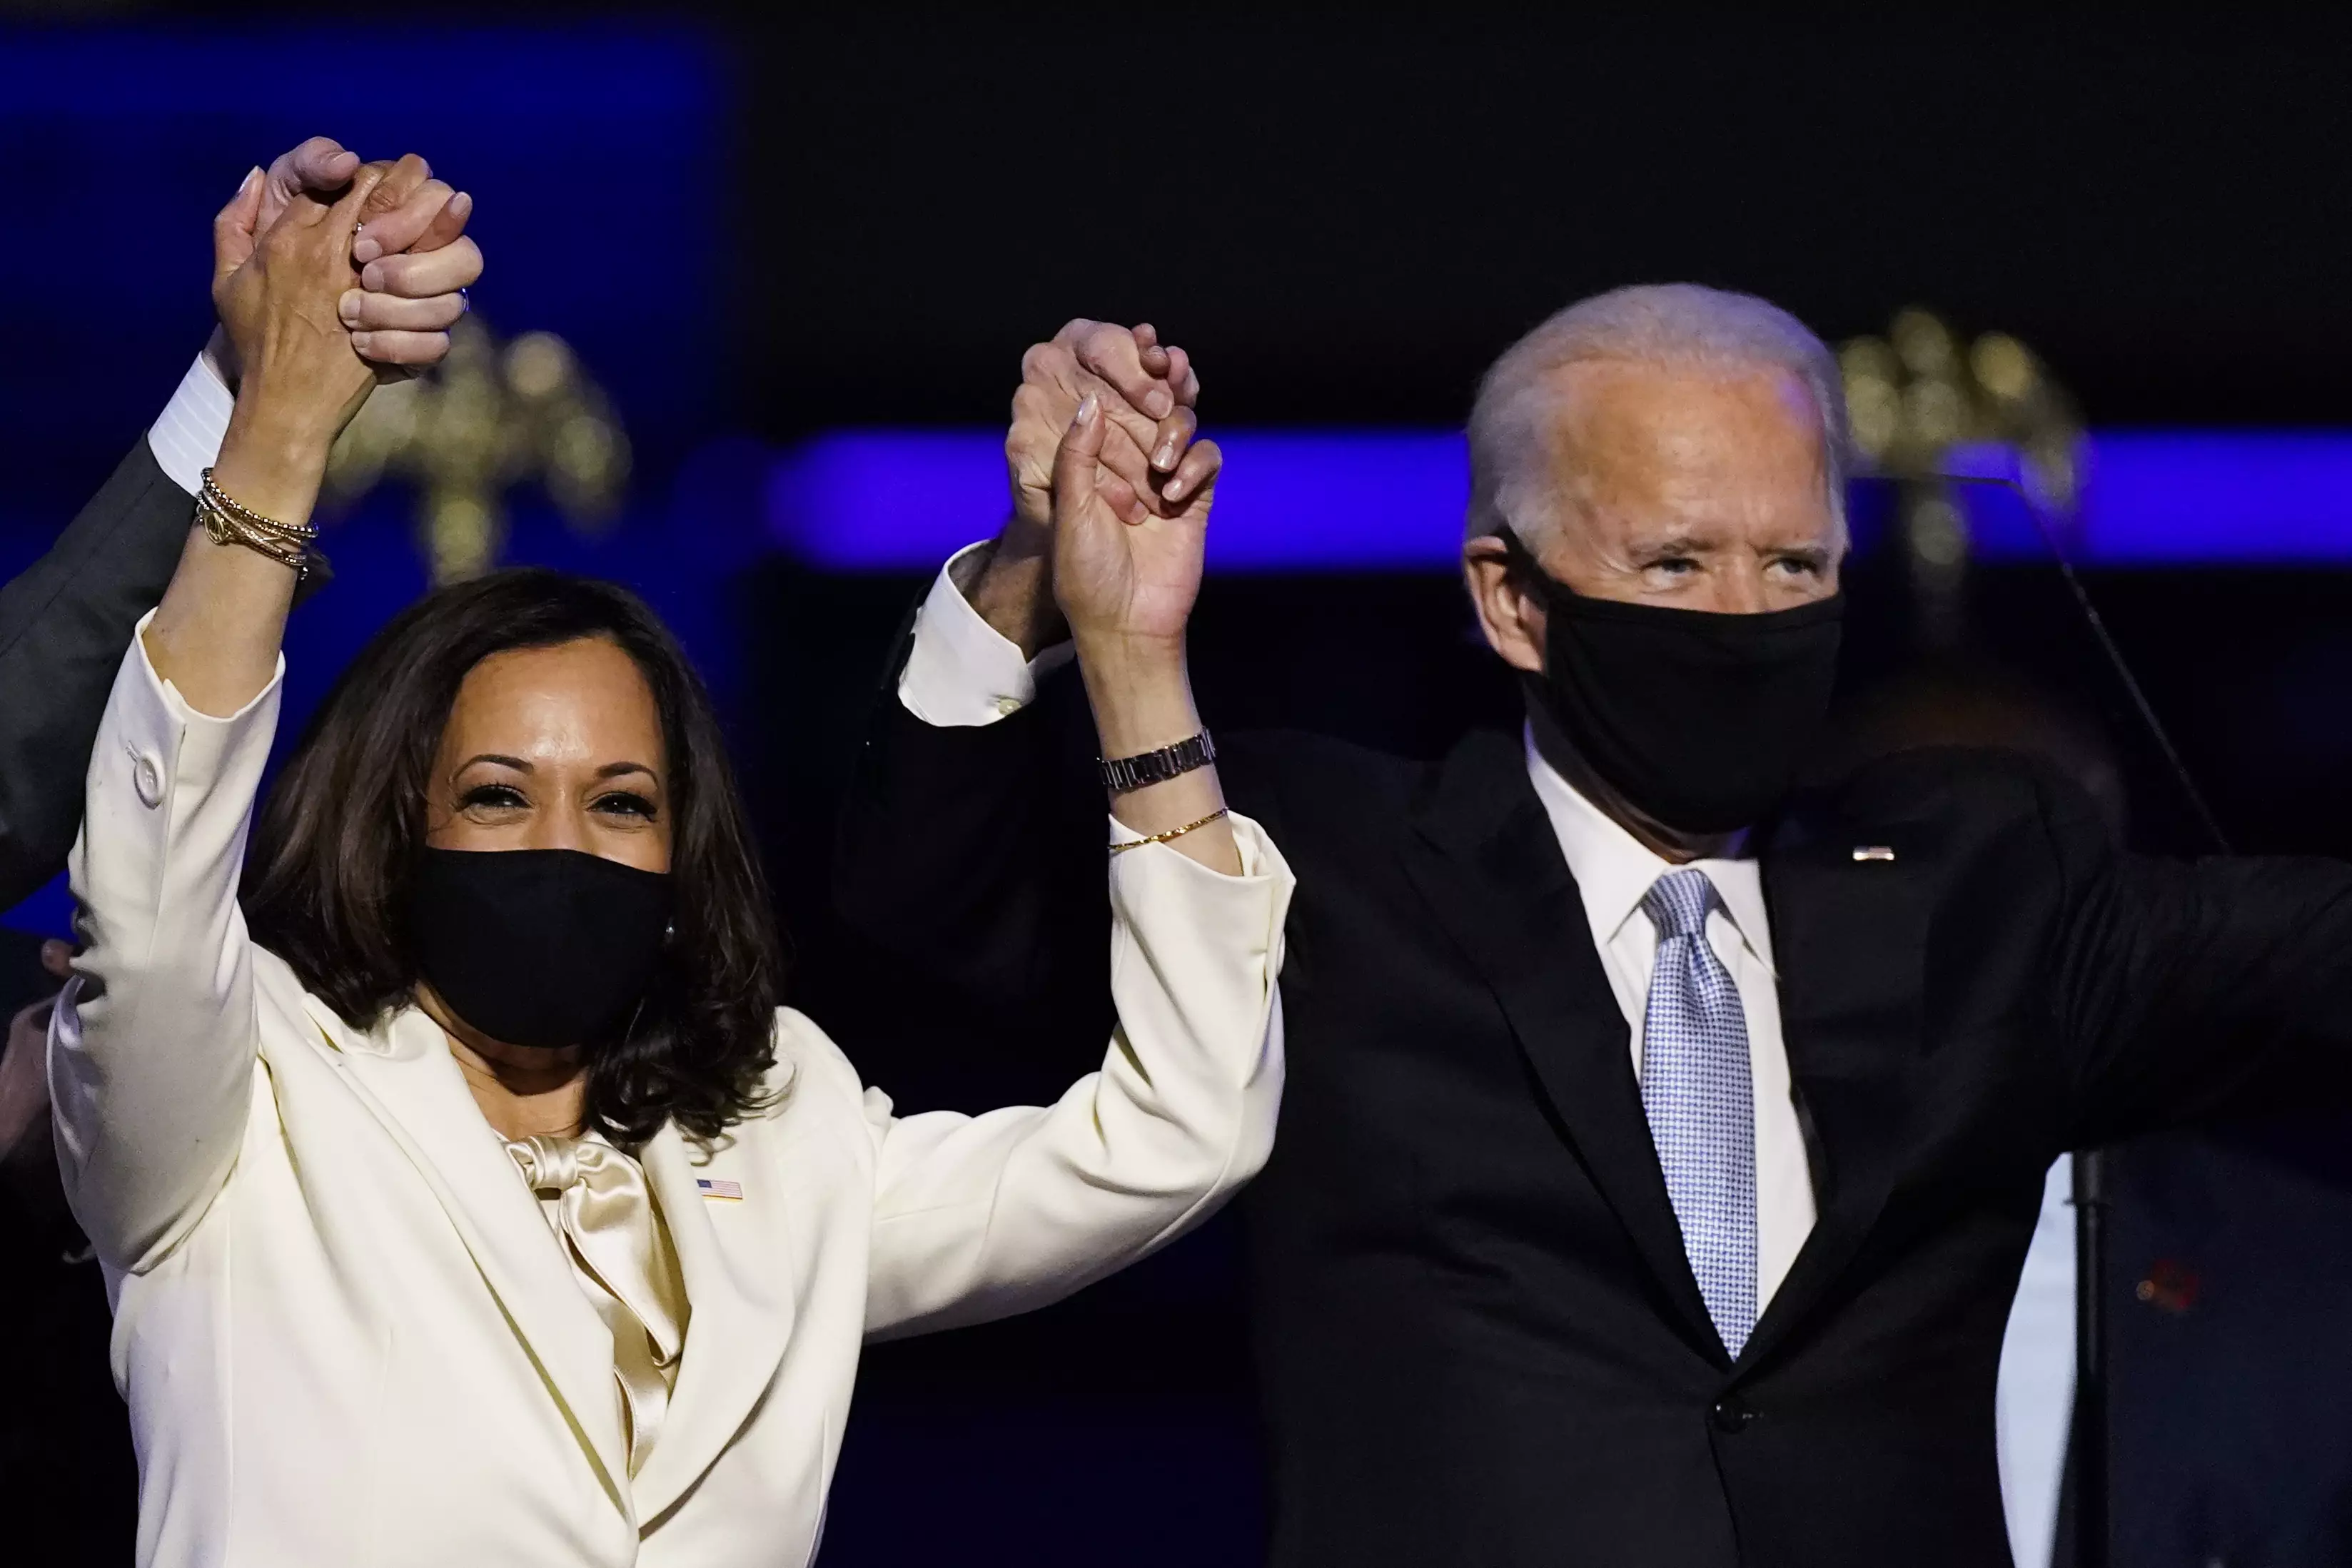 Biden is now President Elect and Harris is Vice President Elect (